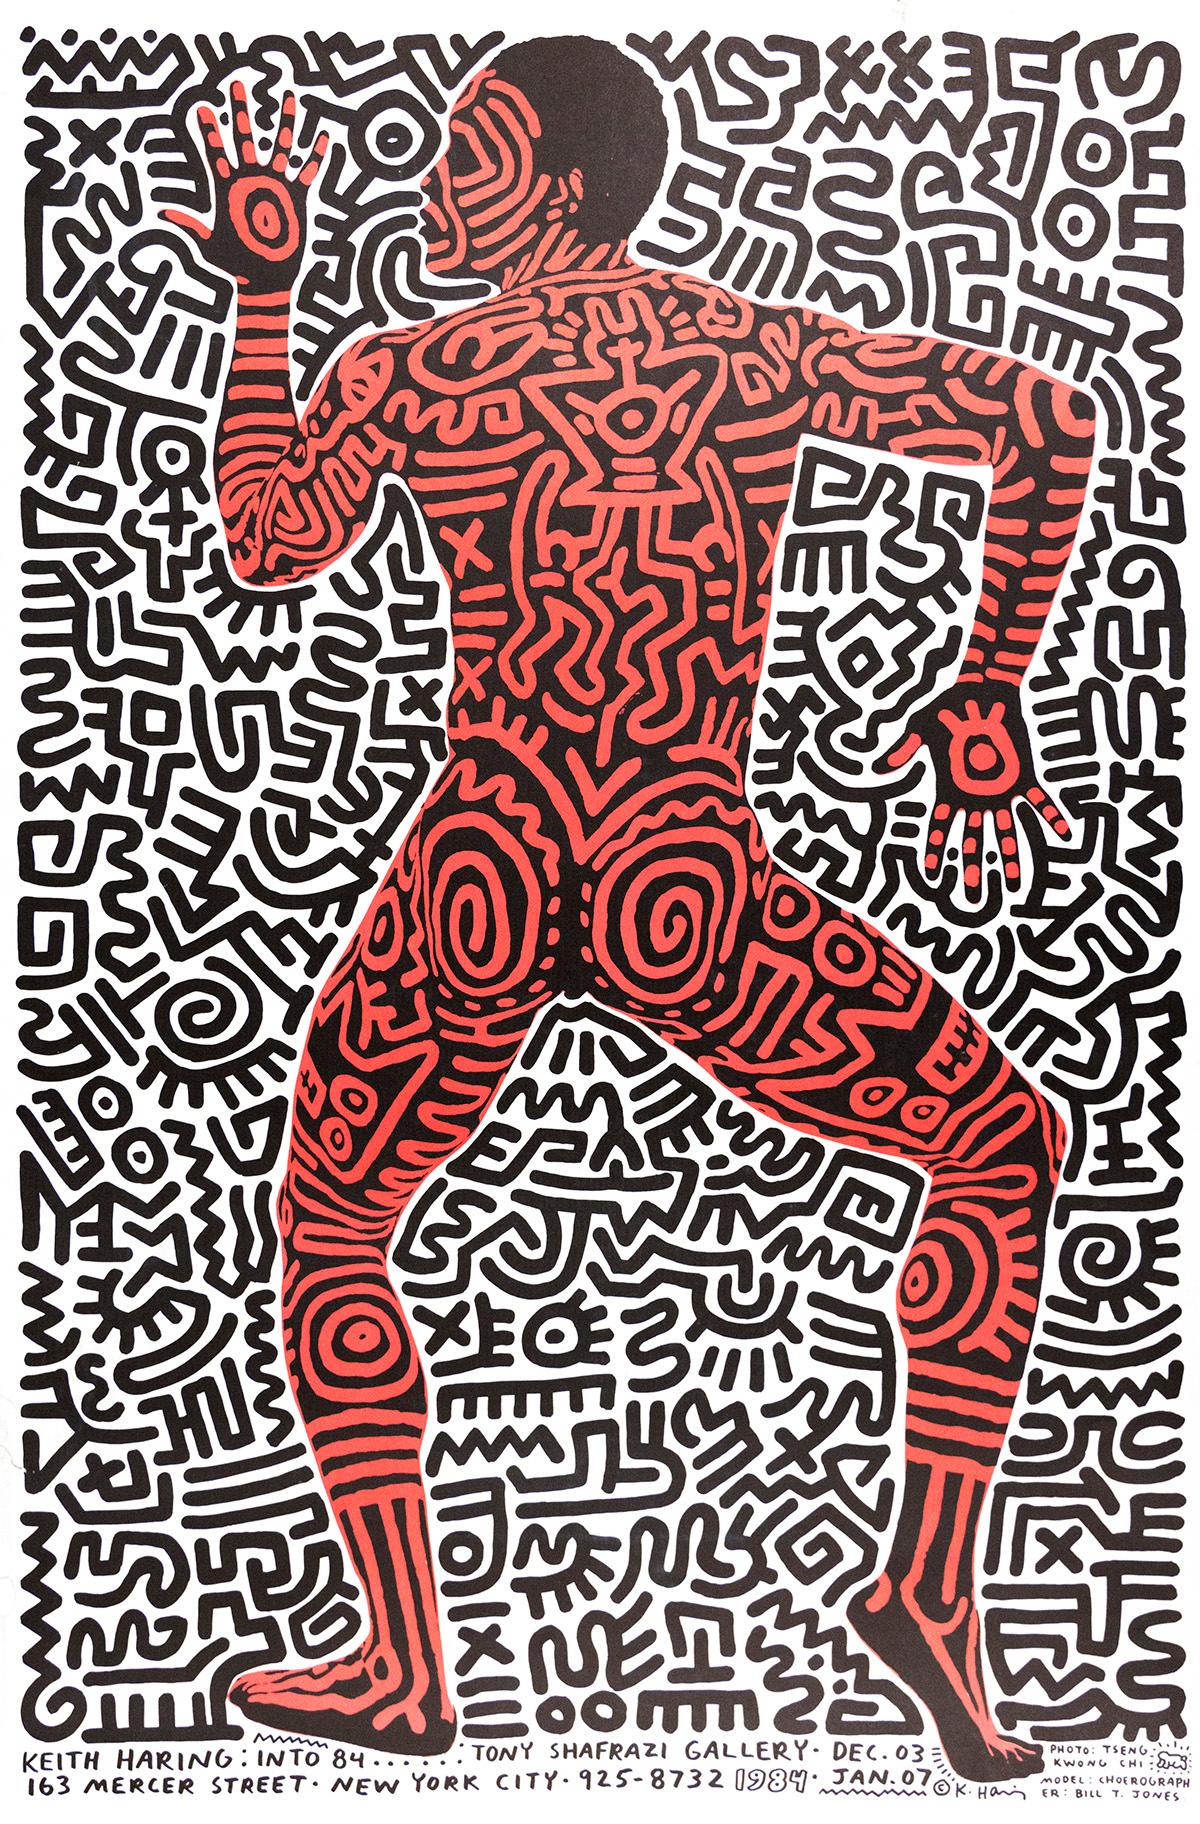 Into 84 Exhibition Poster [Tony Shafrazi Gallery] - Print by Keith Haring